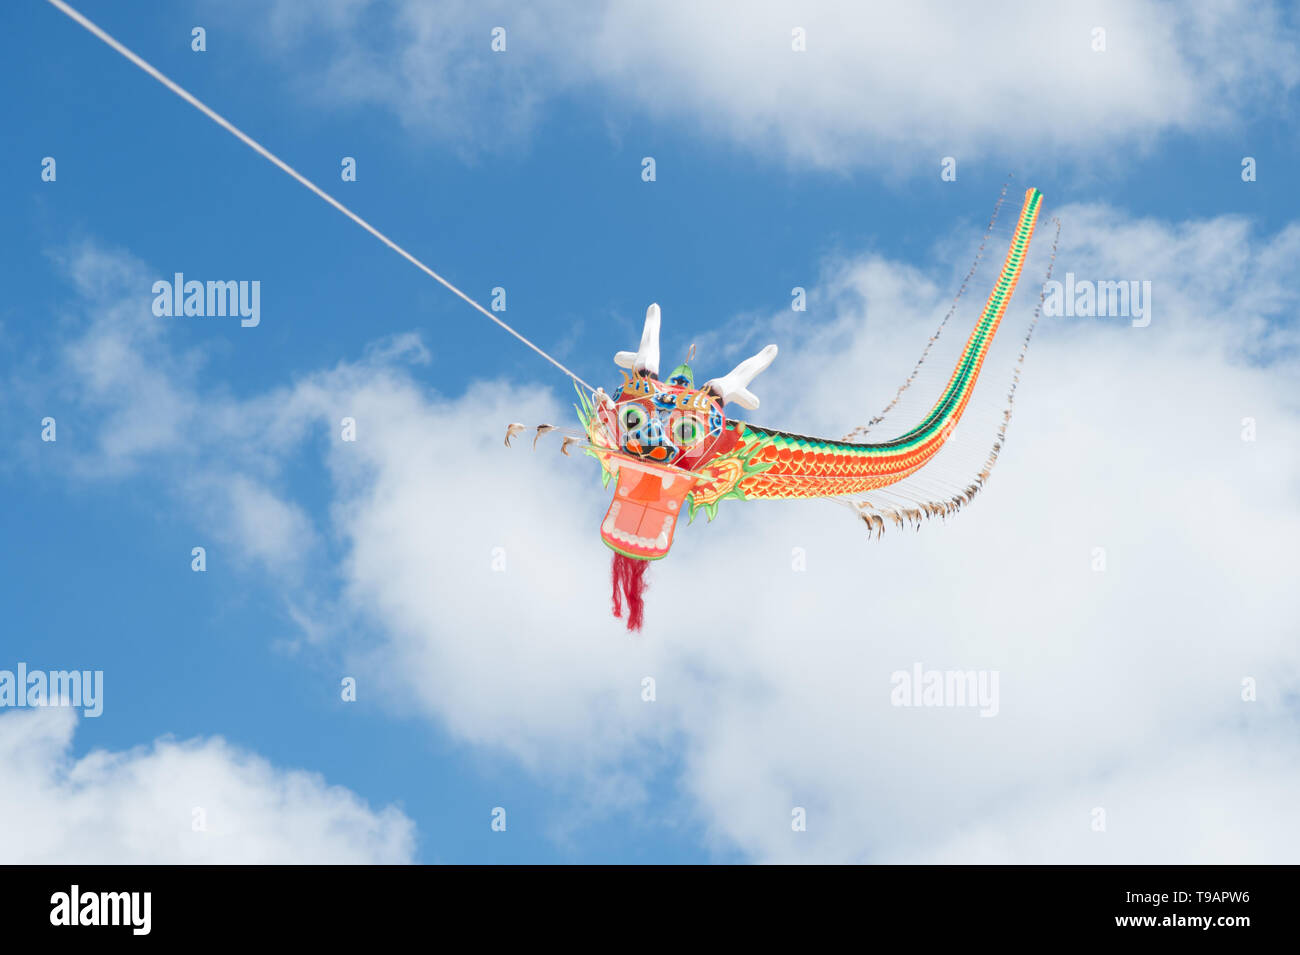 Valletta, Malta. 17th May, 2019. A dragon kite is seen flying in sky during the 2nd Chinese kite festival in Valleta, capital of Malta, on May 17, 2019. Colourful Chinese kites decorated the blue skies above the Maltese capital on Friday, attracting hundreds of children and visitors to the 2nd Chinese kite festival. Credit: Yuan Yun/Xinhua/Alamy Live News Stock Photo